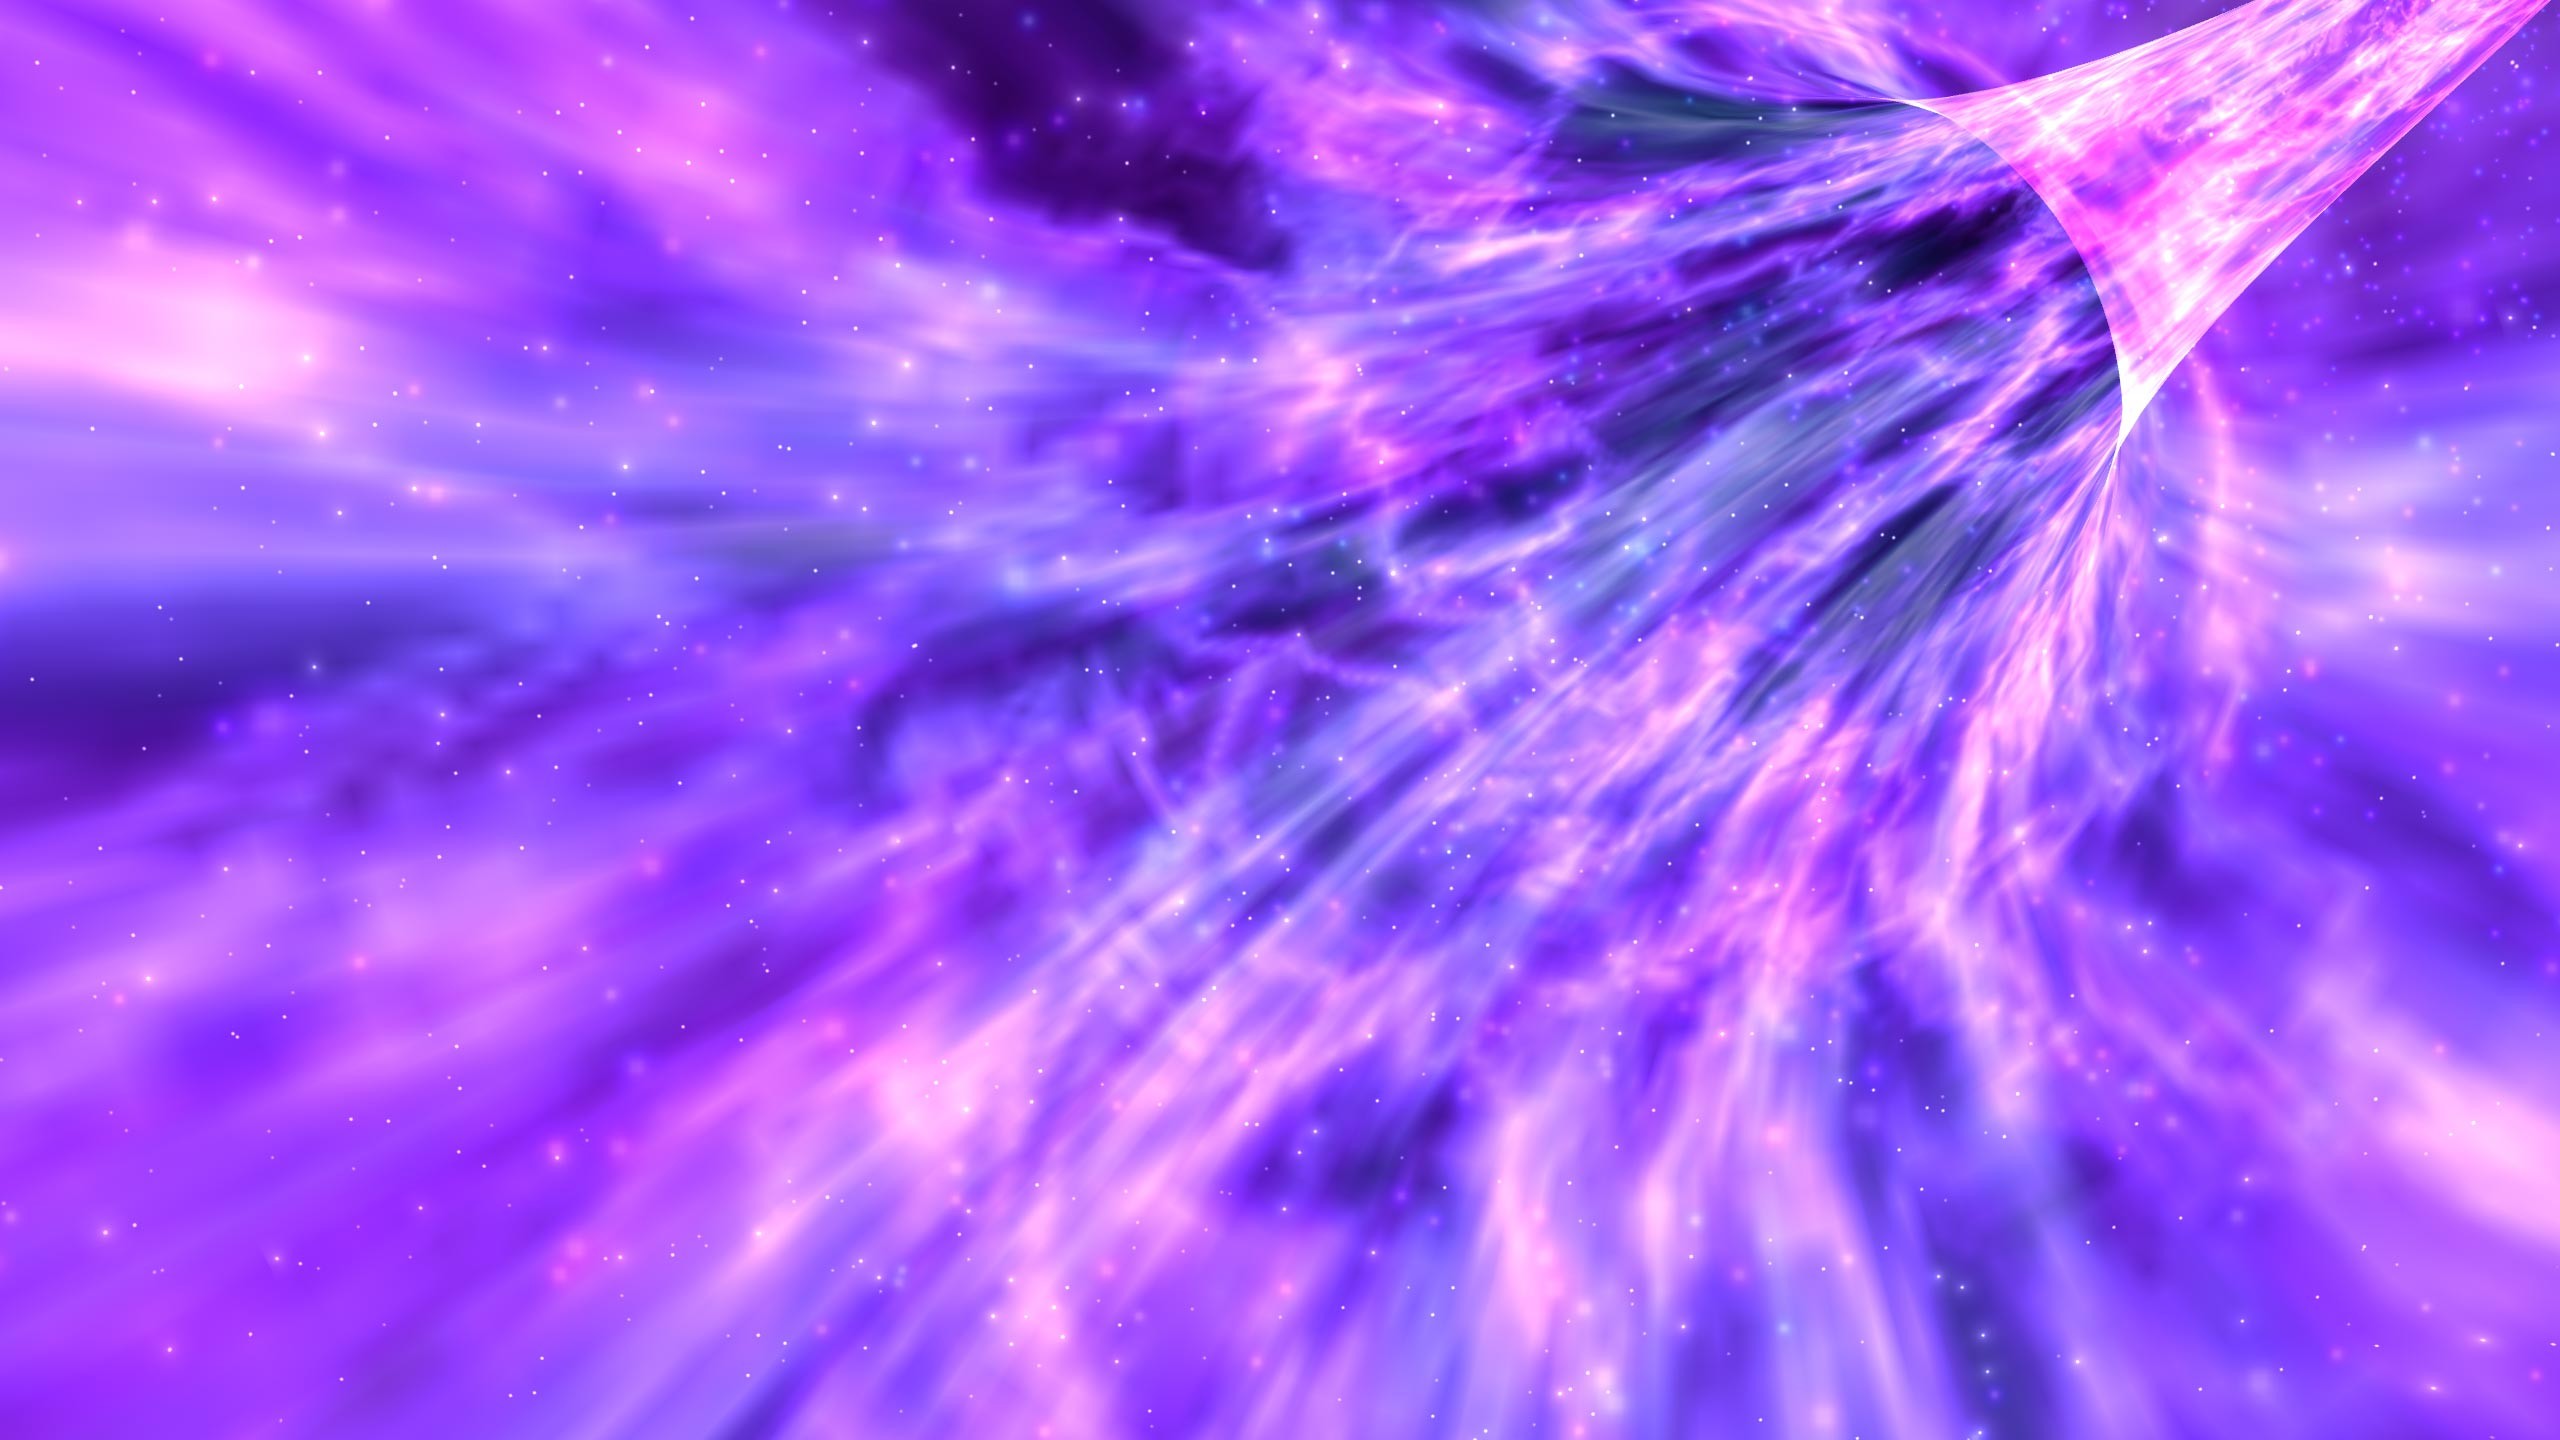 Its also an animated wallpaper which will animate your desktop wallpaper with an effect of space wormhole